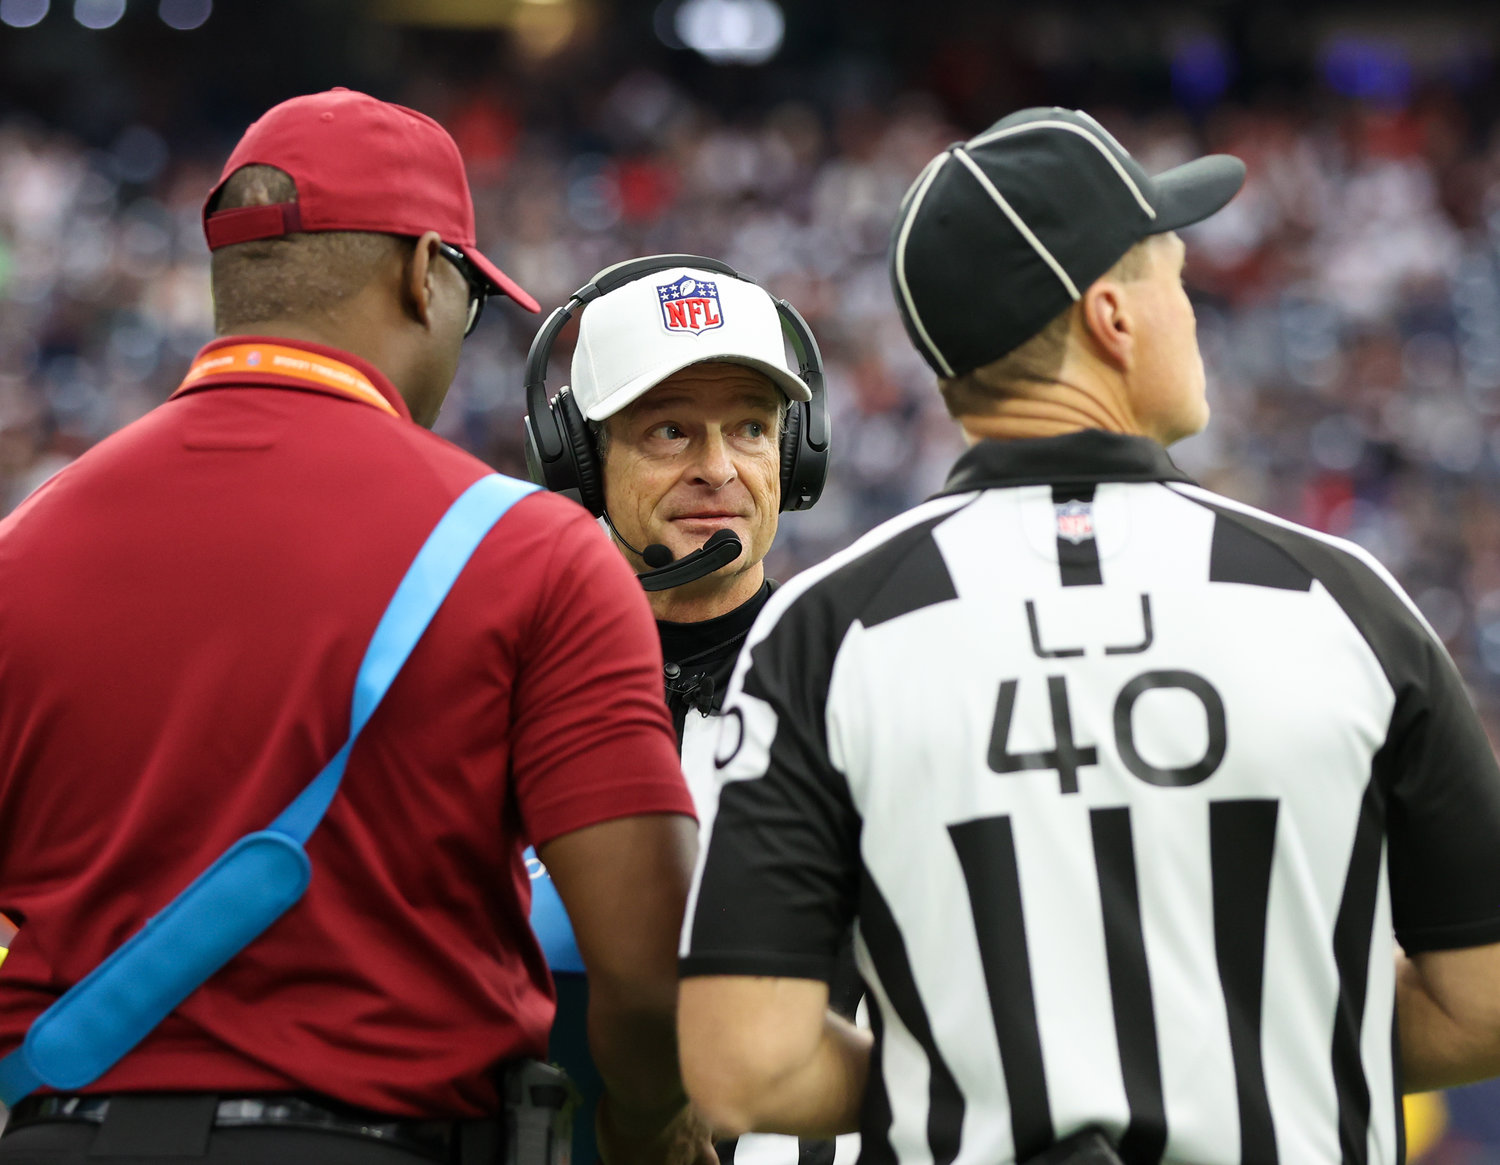 Referee Land Clark (130) and line judge Brian Bolinger (40) during a video review in an NFL game between the Houston Texans and the Cleveland Browns on Dec. 4, 2022, in Houston. The Browns won, 27-14.